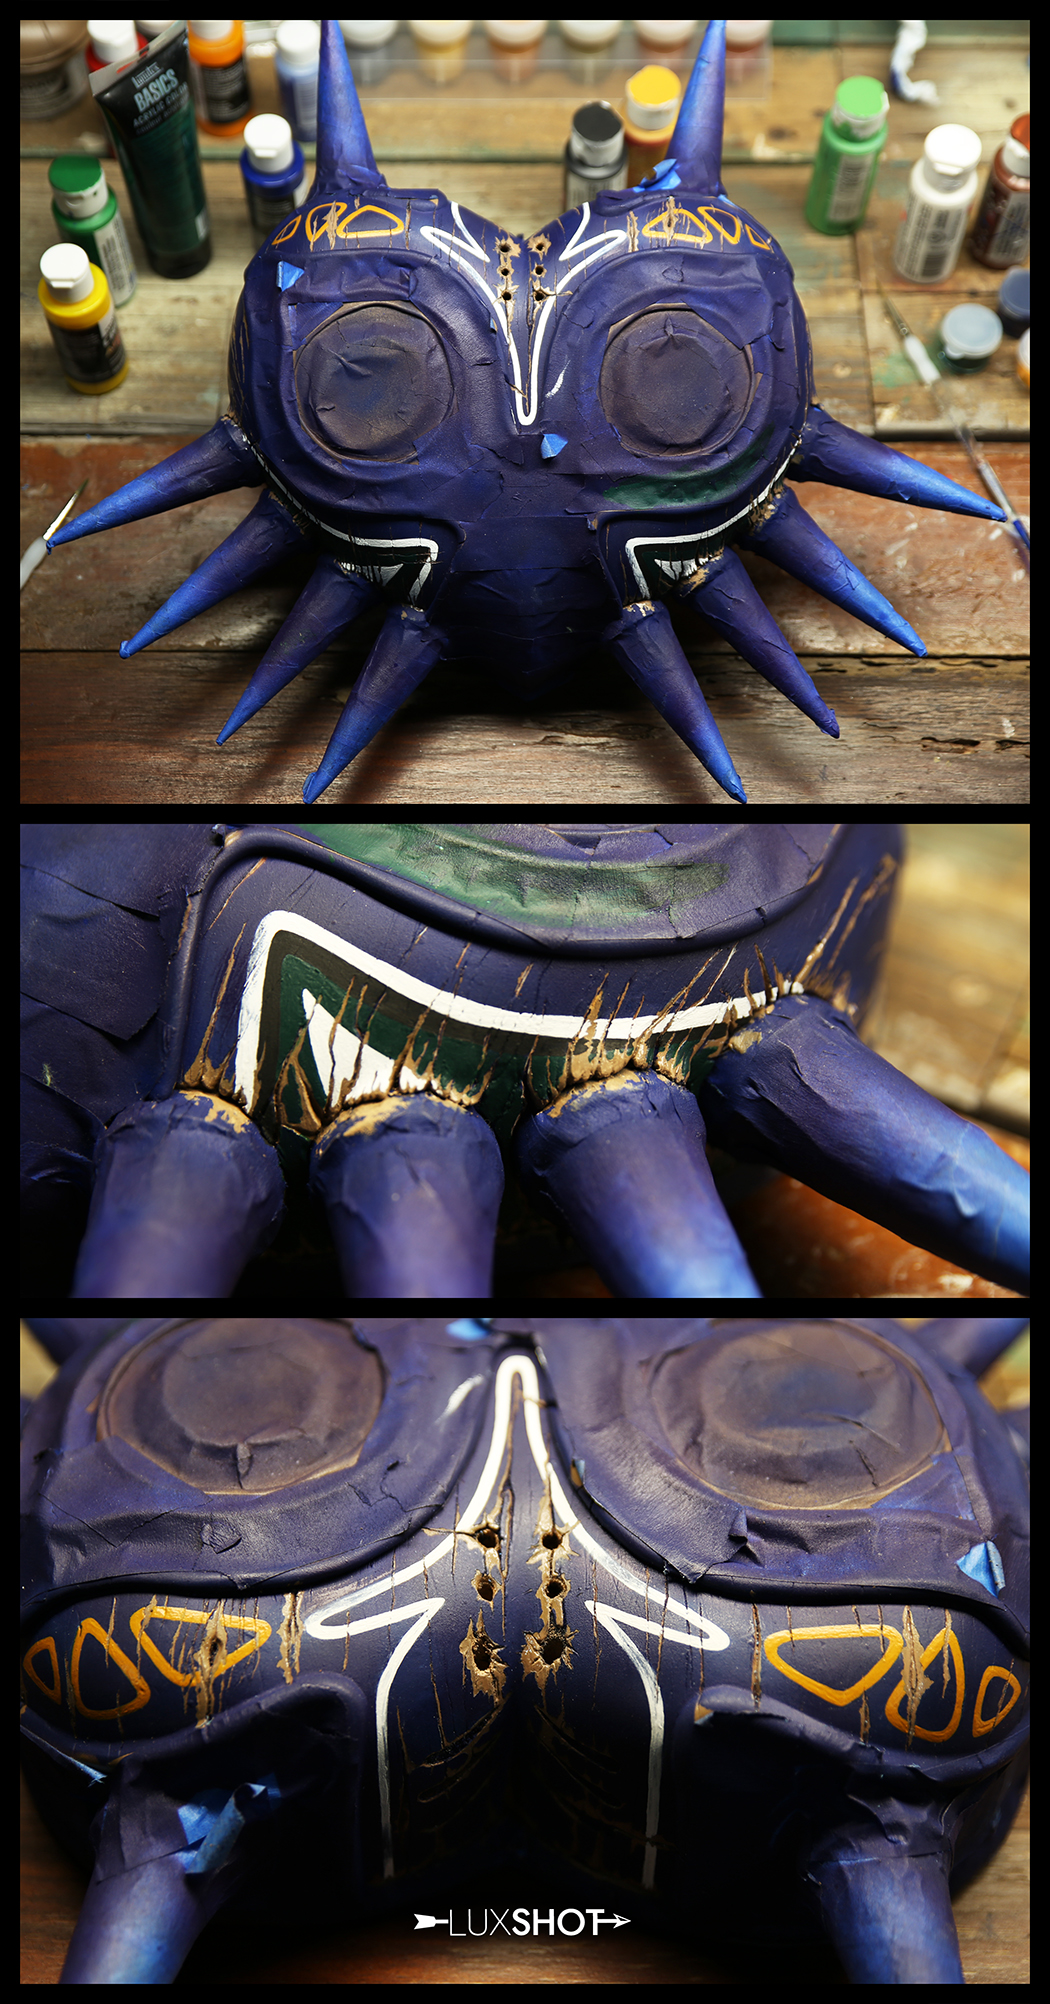 Finished painting some of the details from the front of the mask, now it's time for some weathering.